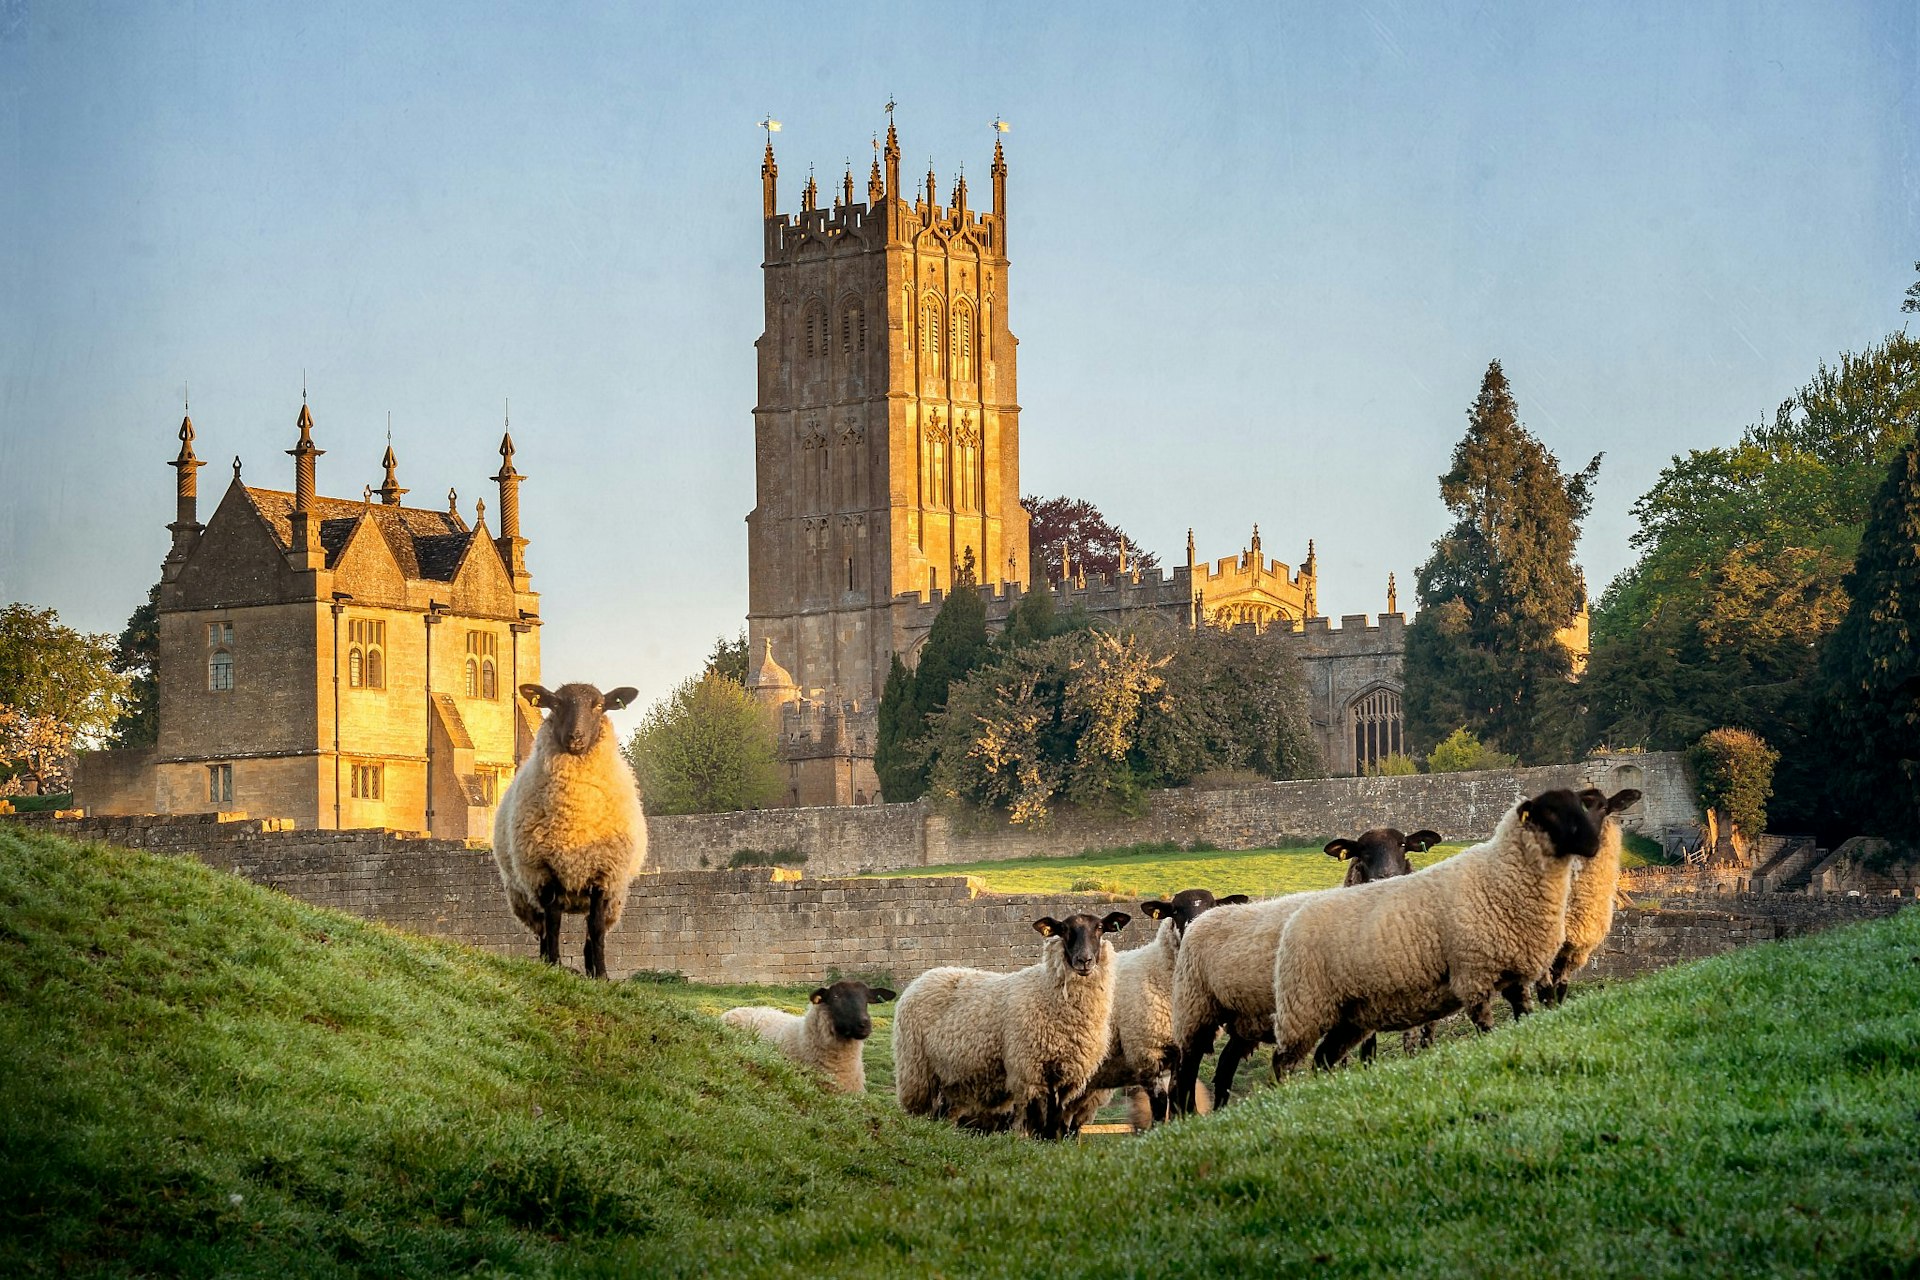 Cotswold sheep in front of a church and another stone building during the early morning.